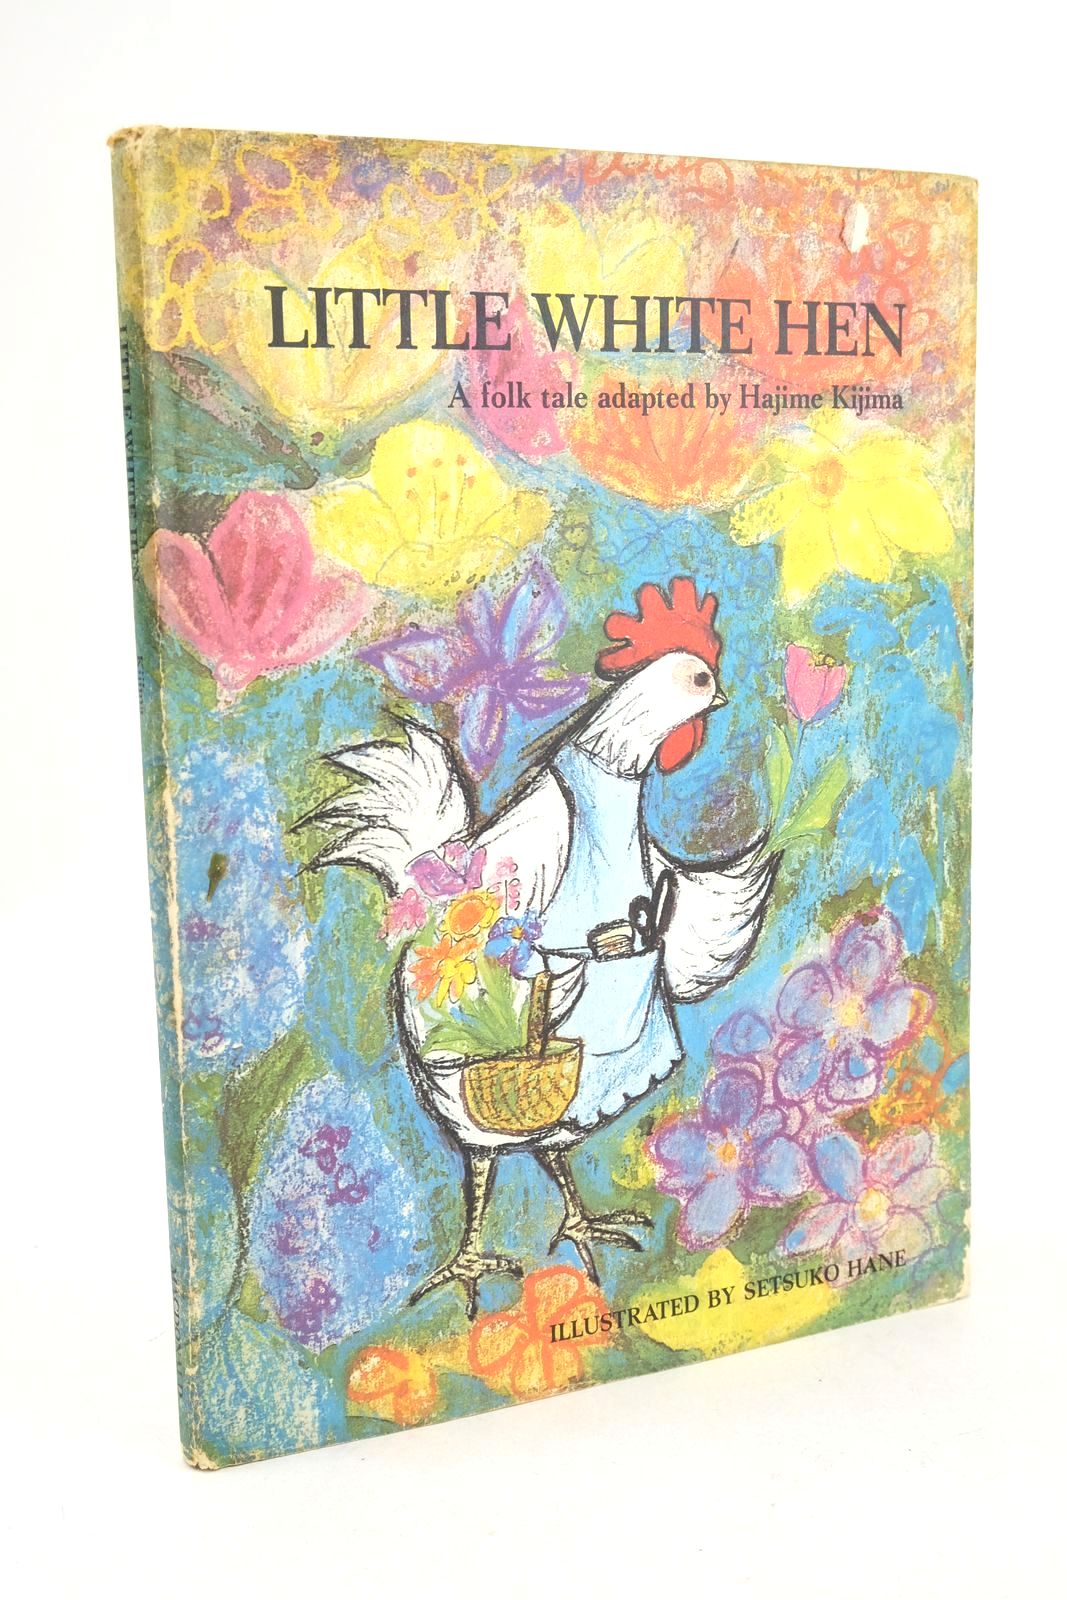 Photo of LITTLE WHITE HEN written by Kijima, Hajime illustrated by Hane, Setsuko published by Macdonald &amp; Co. (Publishers) Ltd. (STOCK CODE: 1325614)  for sale by Stella & Rose's Books